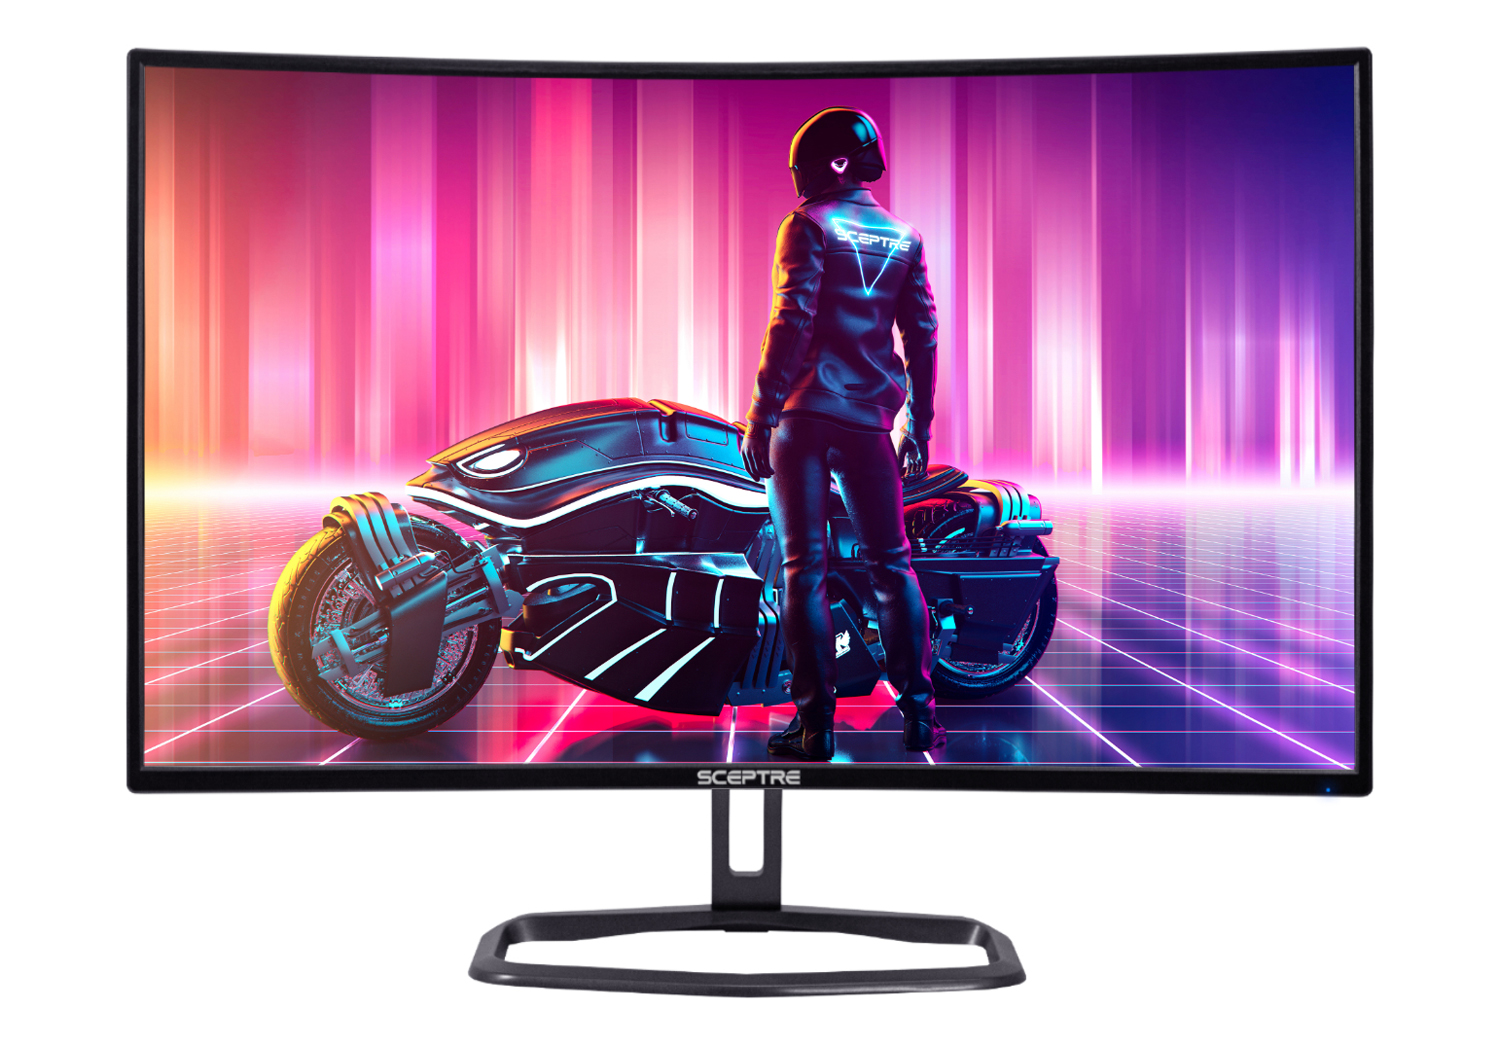 Sceptre 32-inch Curved Gaming Monitor Overdrive Maroc